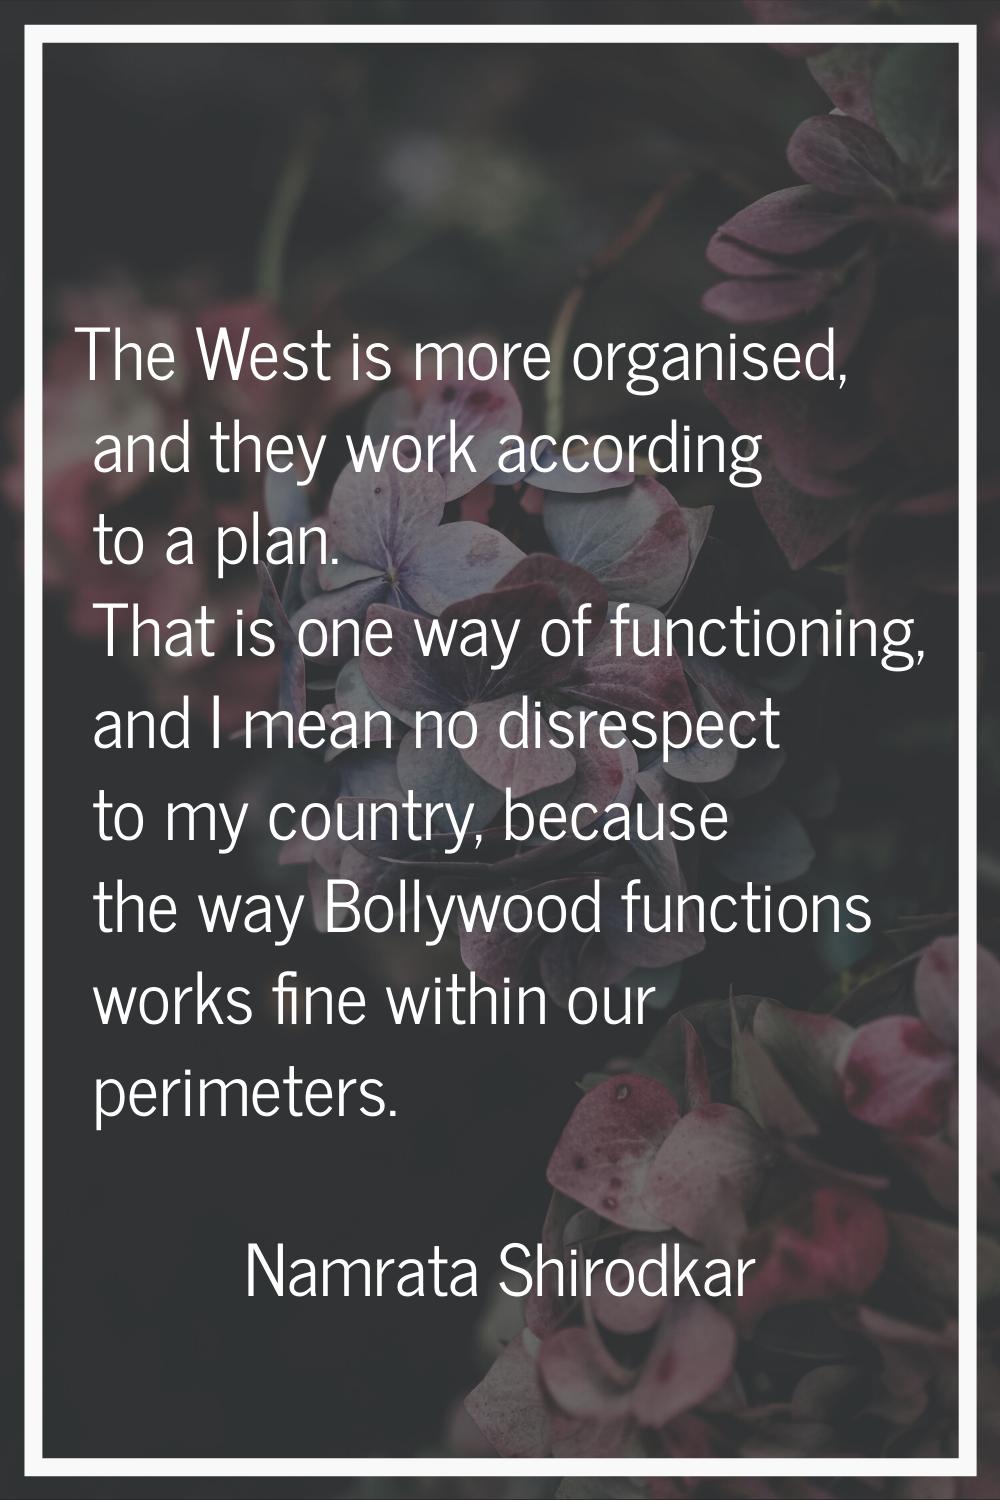 The West is more organised, and they work according to a plan. That is one way of functioning, and 